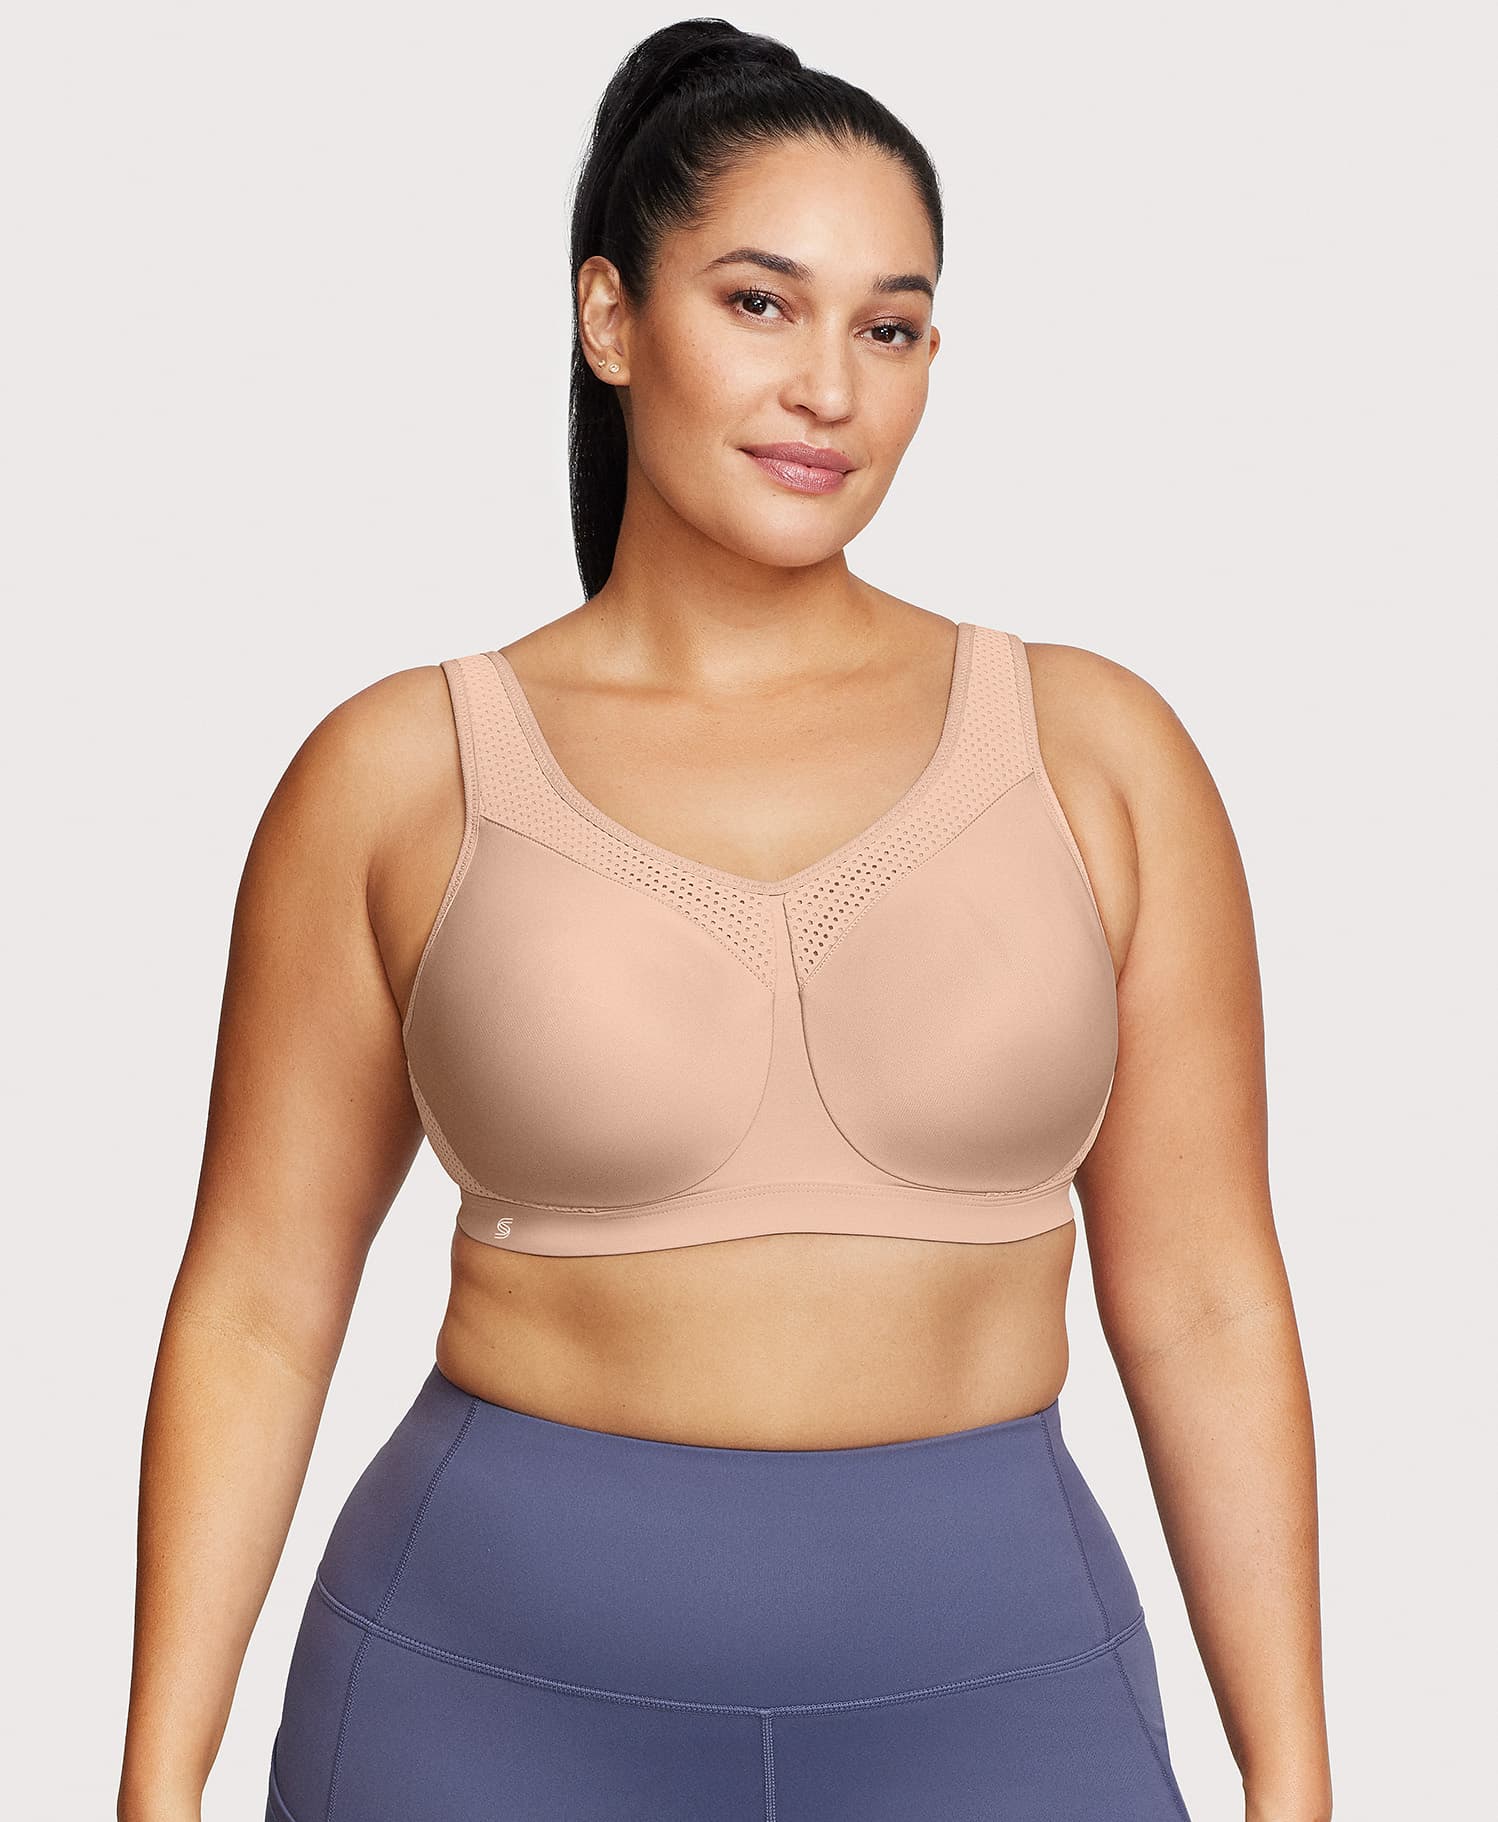 Outfit: High Impact Wide Strap Sports Bra For Women Comfy Long